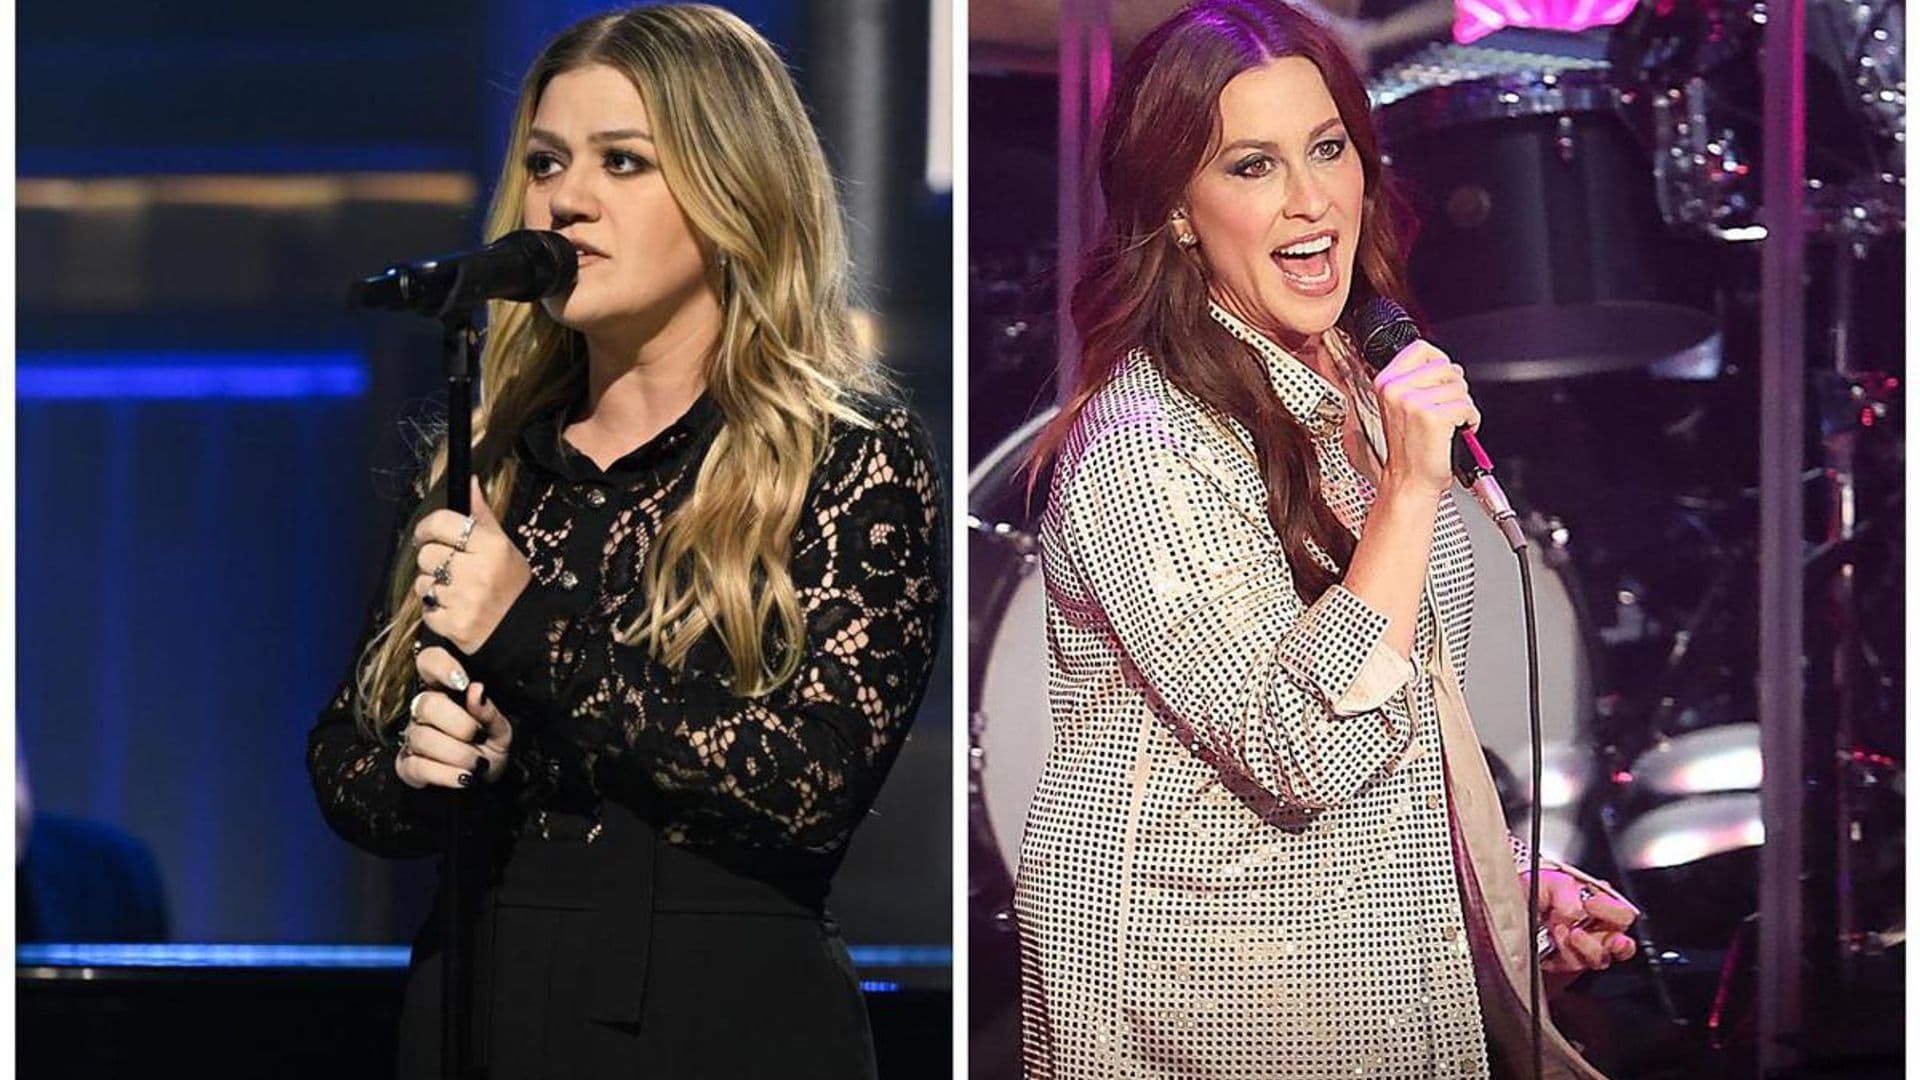 Kelly Clarkson and Alanis Morissette’s incredible performance of ‘You Oughta Know’